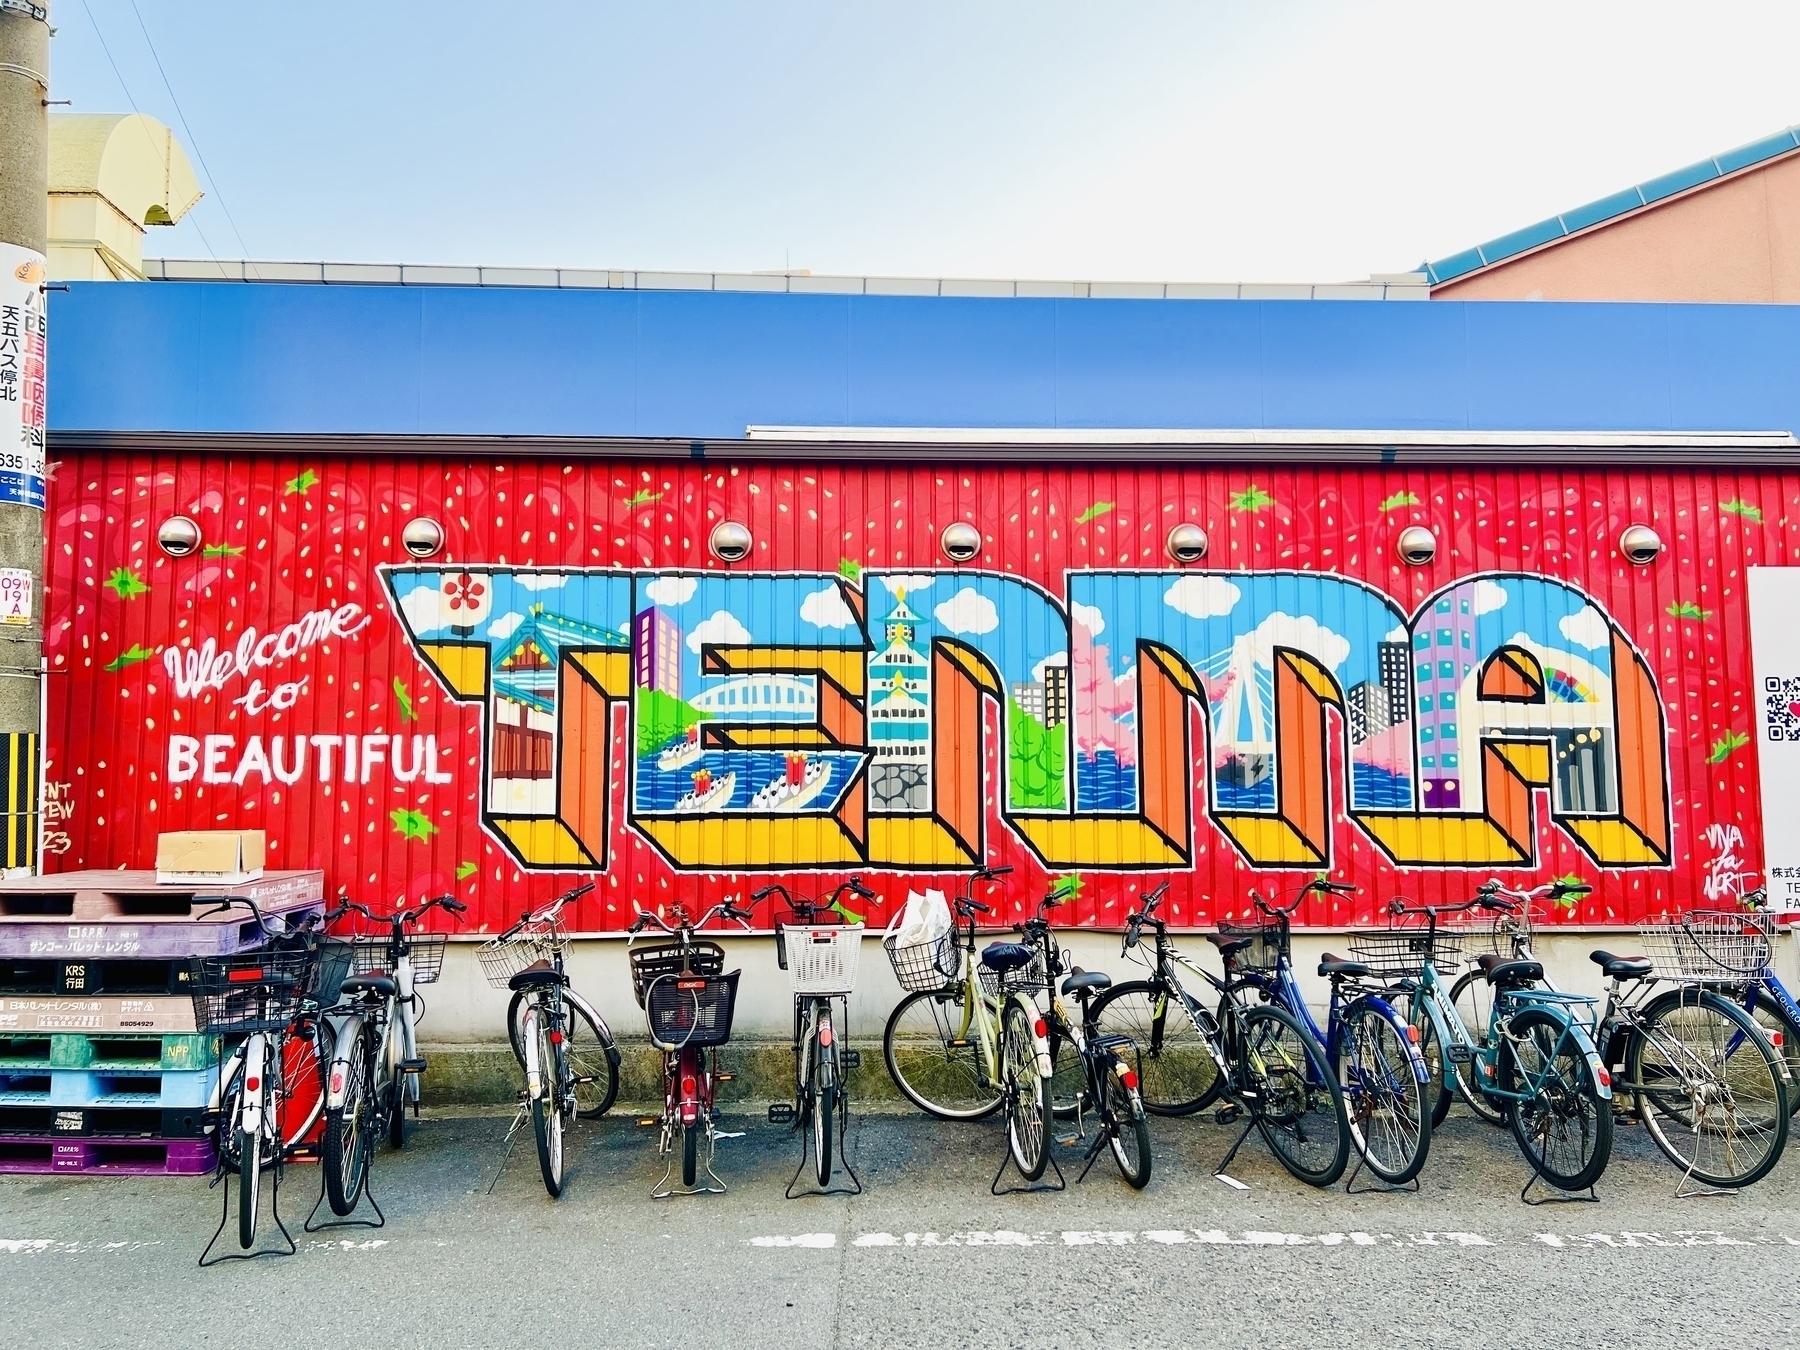 Bikes lined up along a wall with a mural that says “welcome to beautiful Tenma” in bright colours